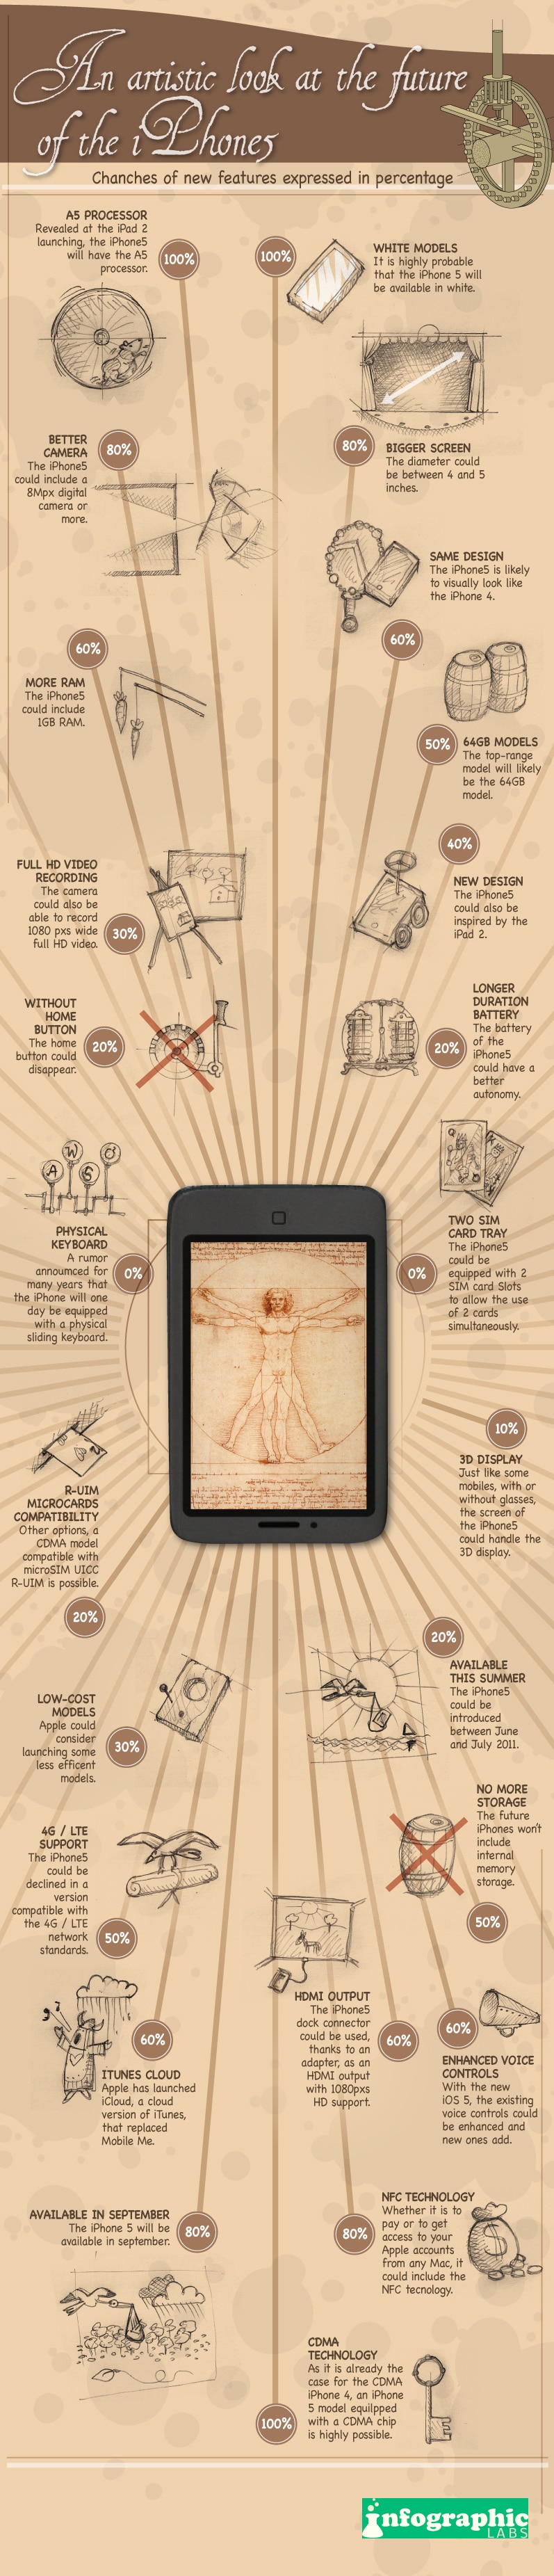 An Artistic iPhone 5 Infographic